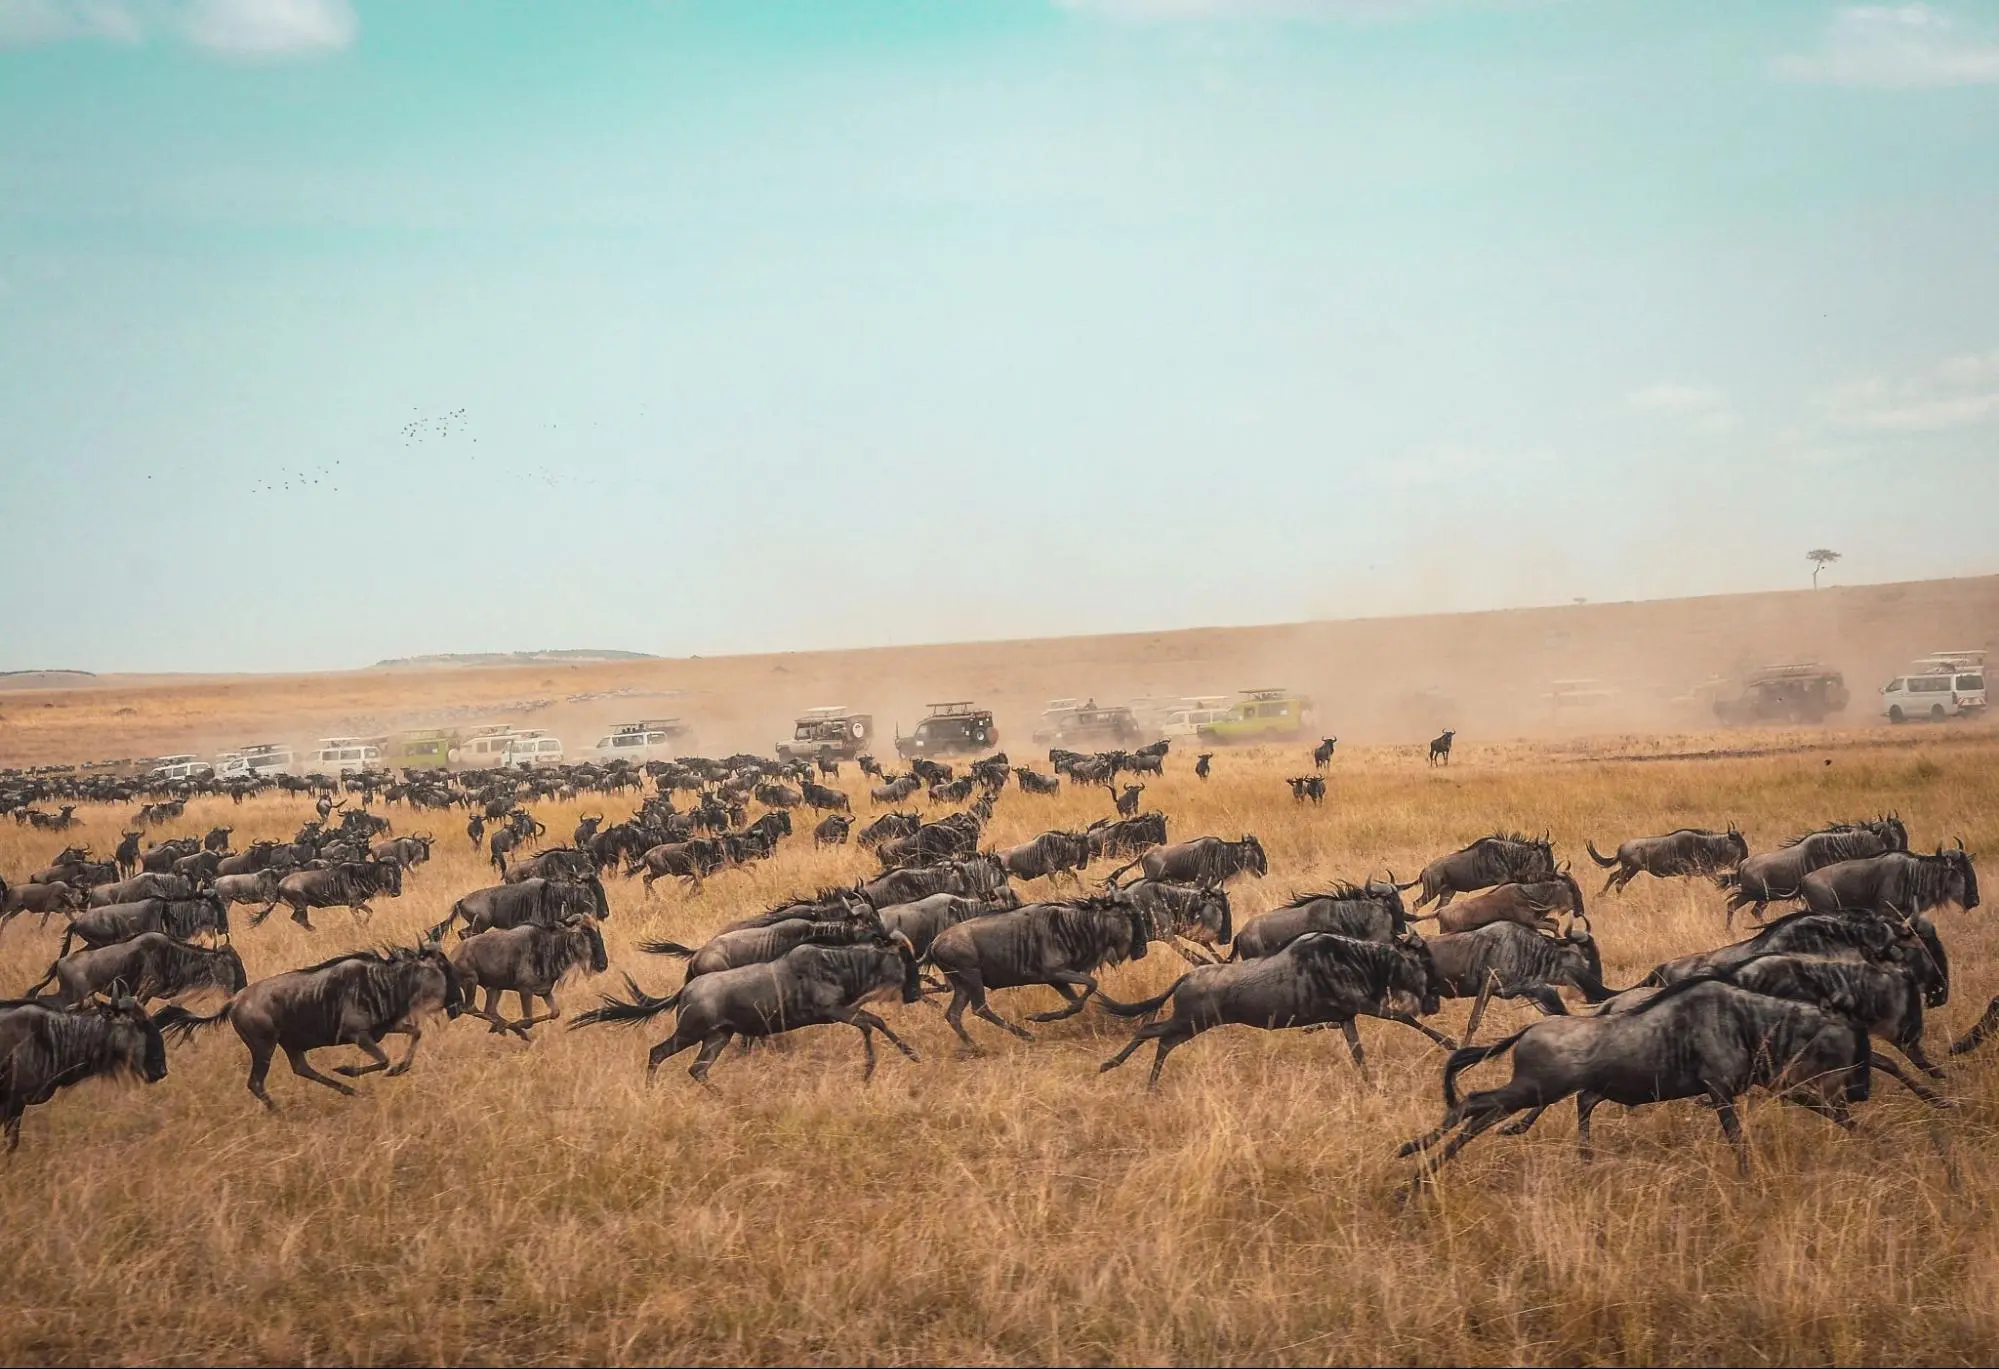 A captivating image showcasing a herd of wildebeest during their migration.